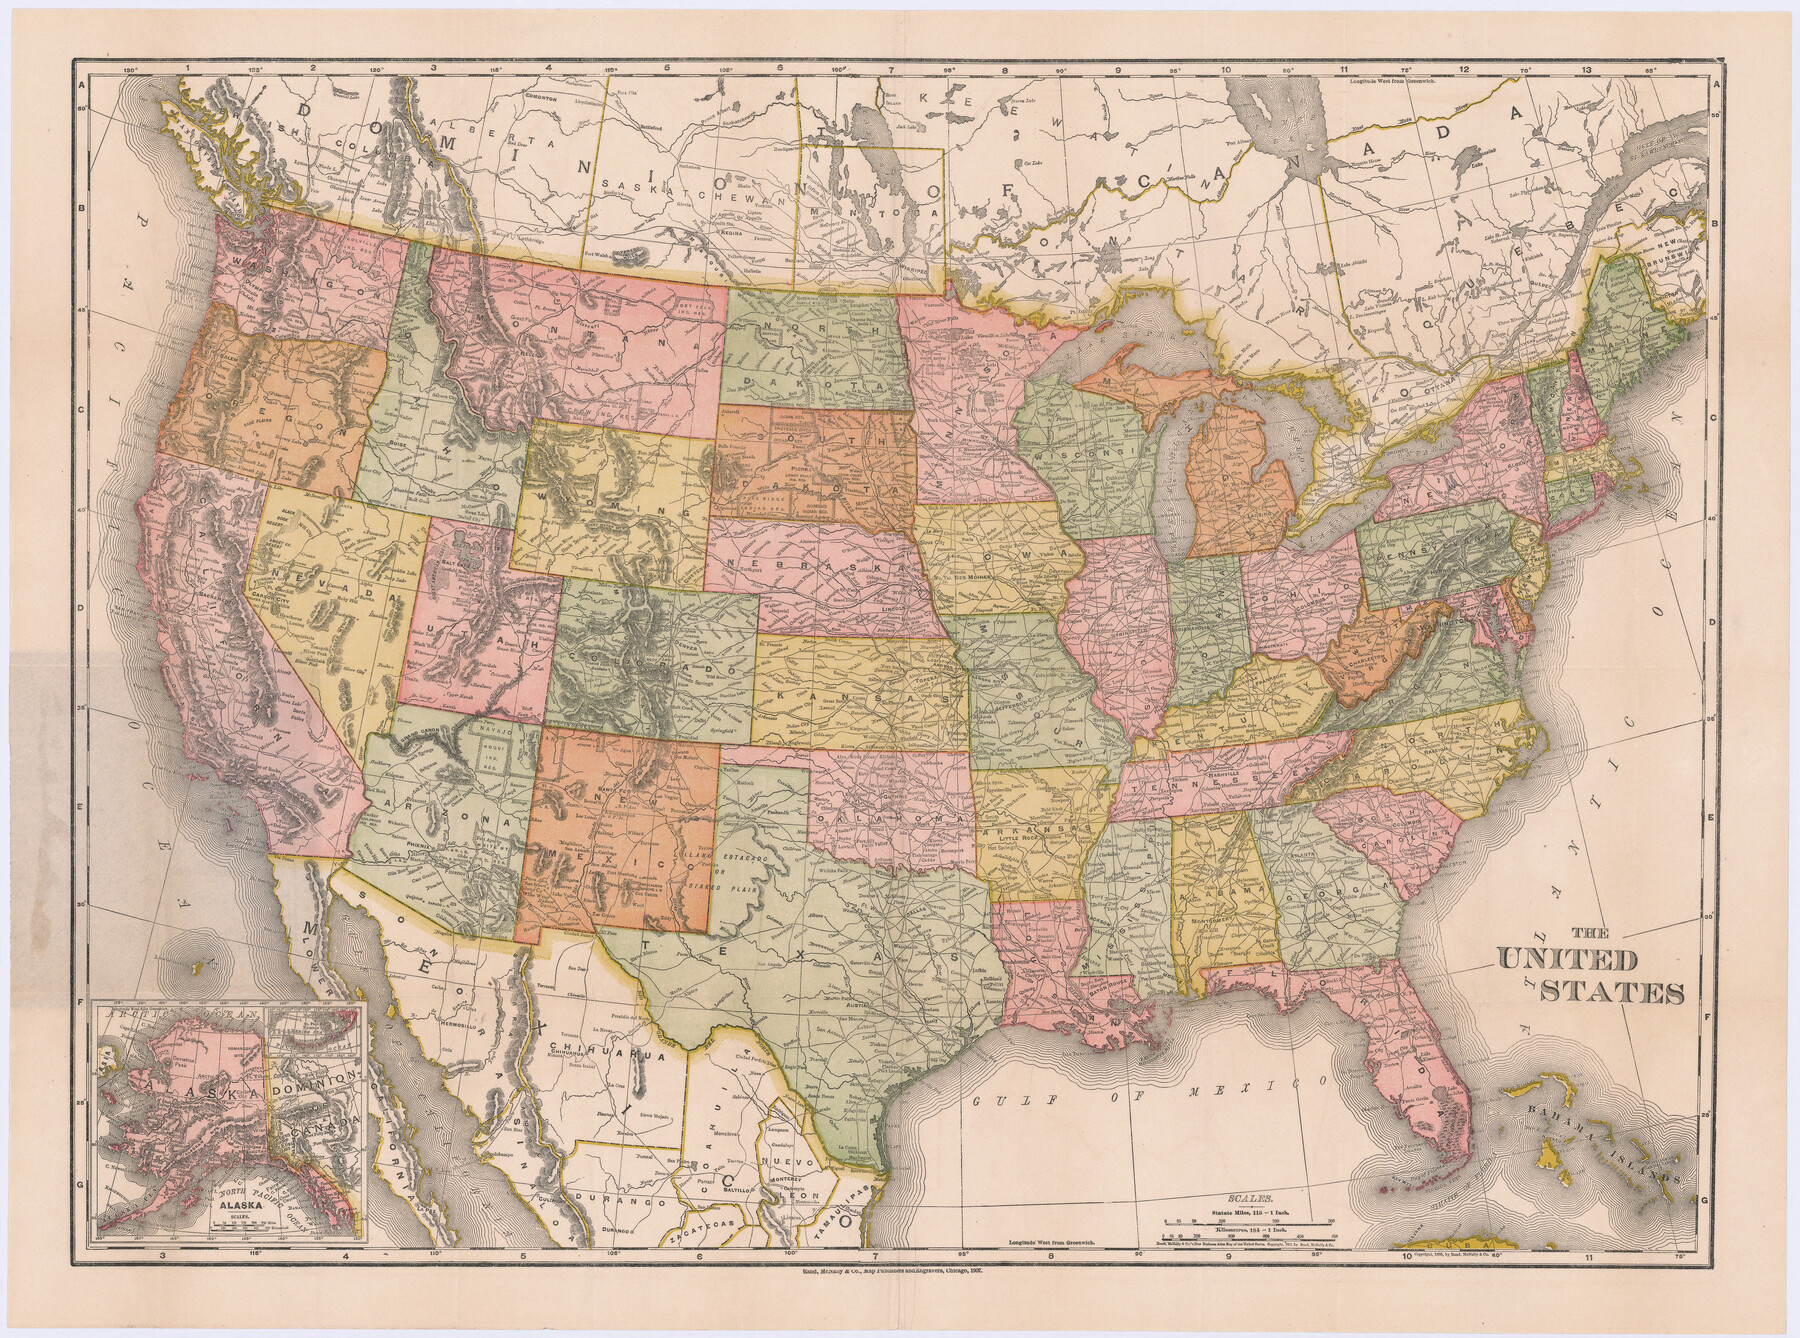 95859, The United States, Cobb Digital Map Collection - 1